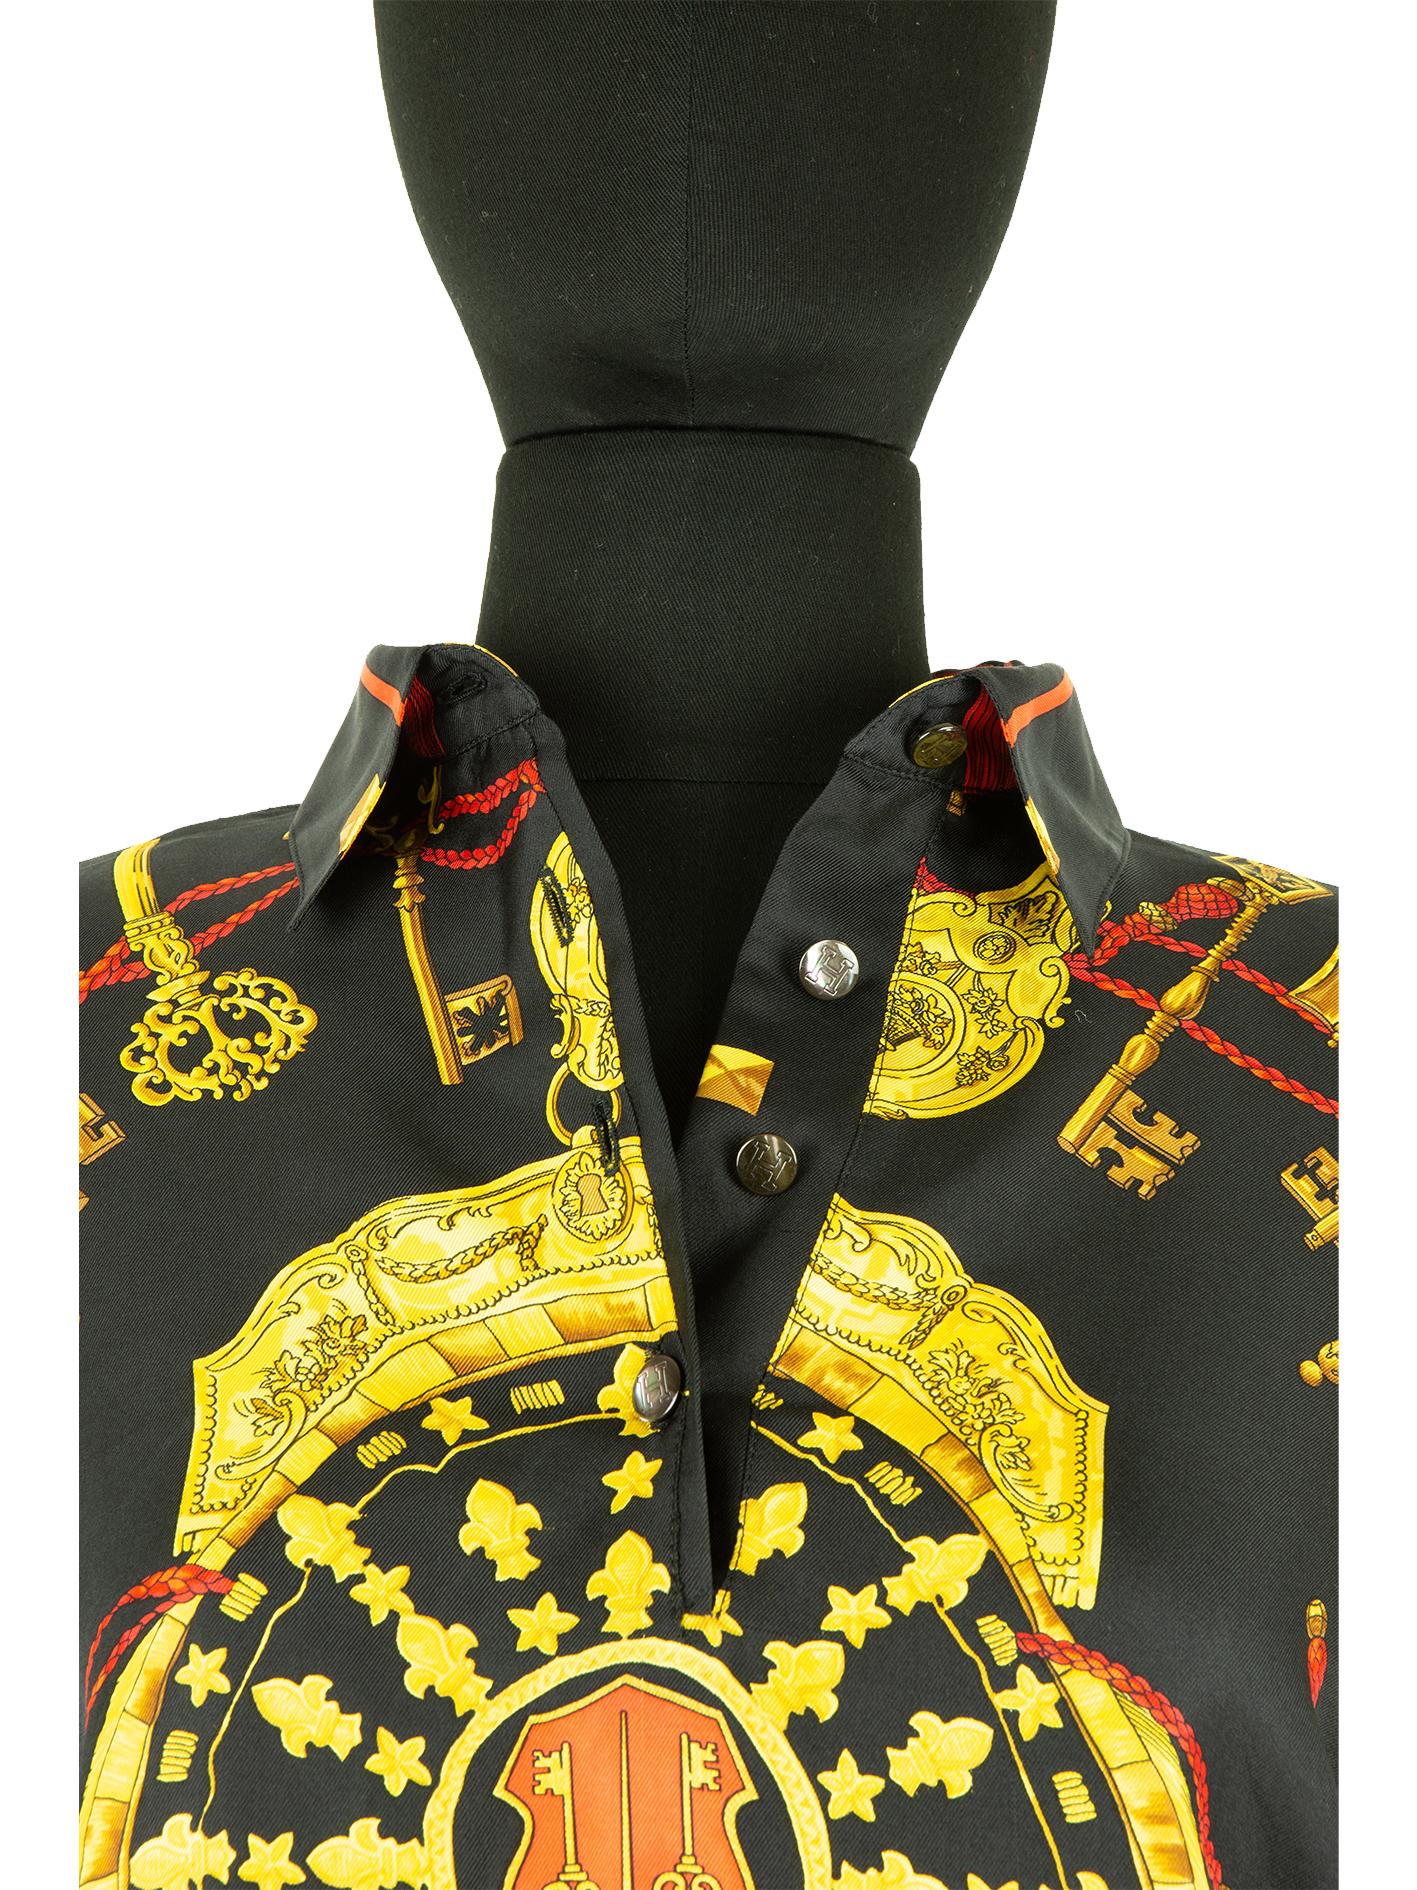 A 1990s Hermès long sleeve top with baroque style print on silk featuring a selection of gold-coloured keys laid on a red braided cord all of which circle the gold shield in the centre. This style of print is synonymous with Hermès’ designs and